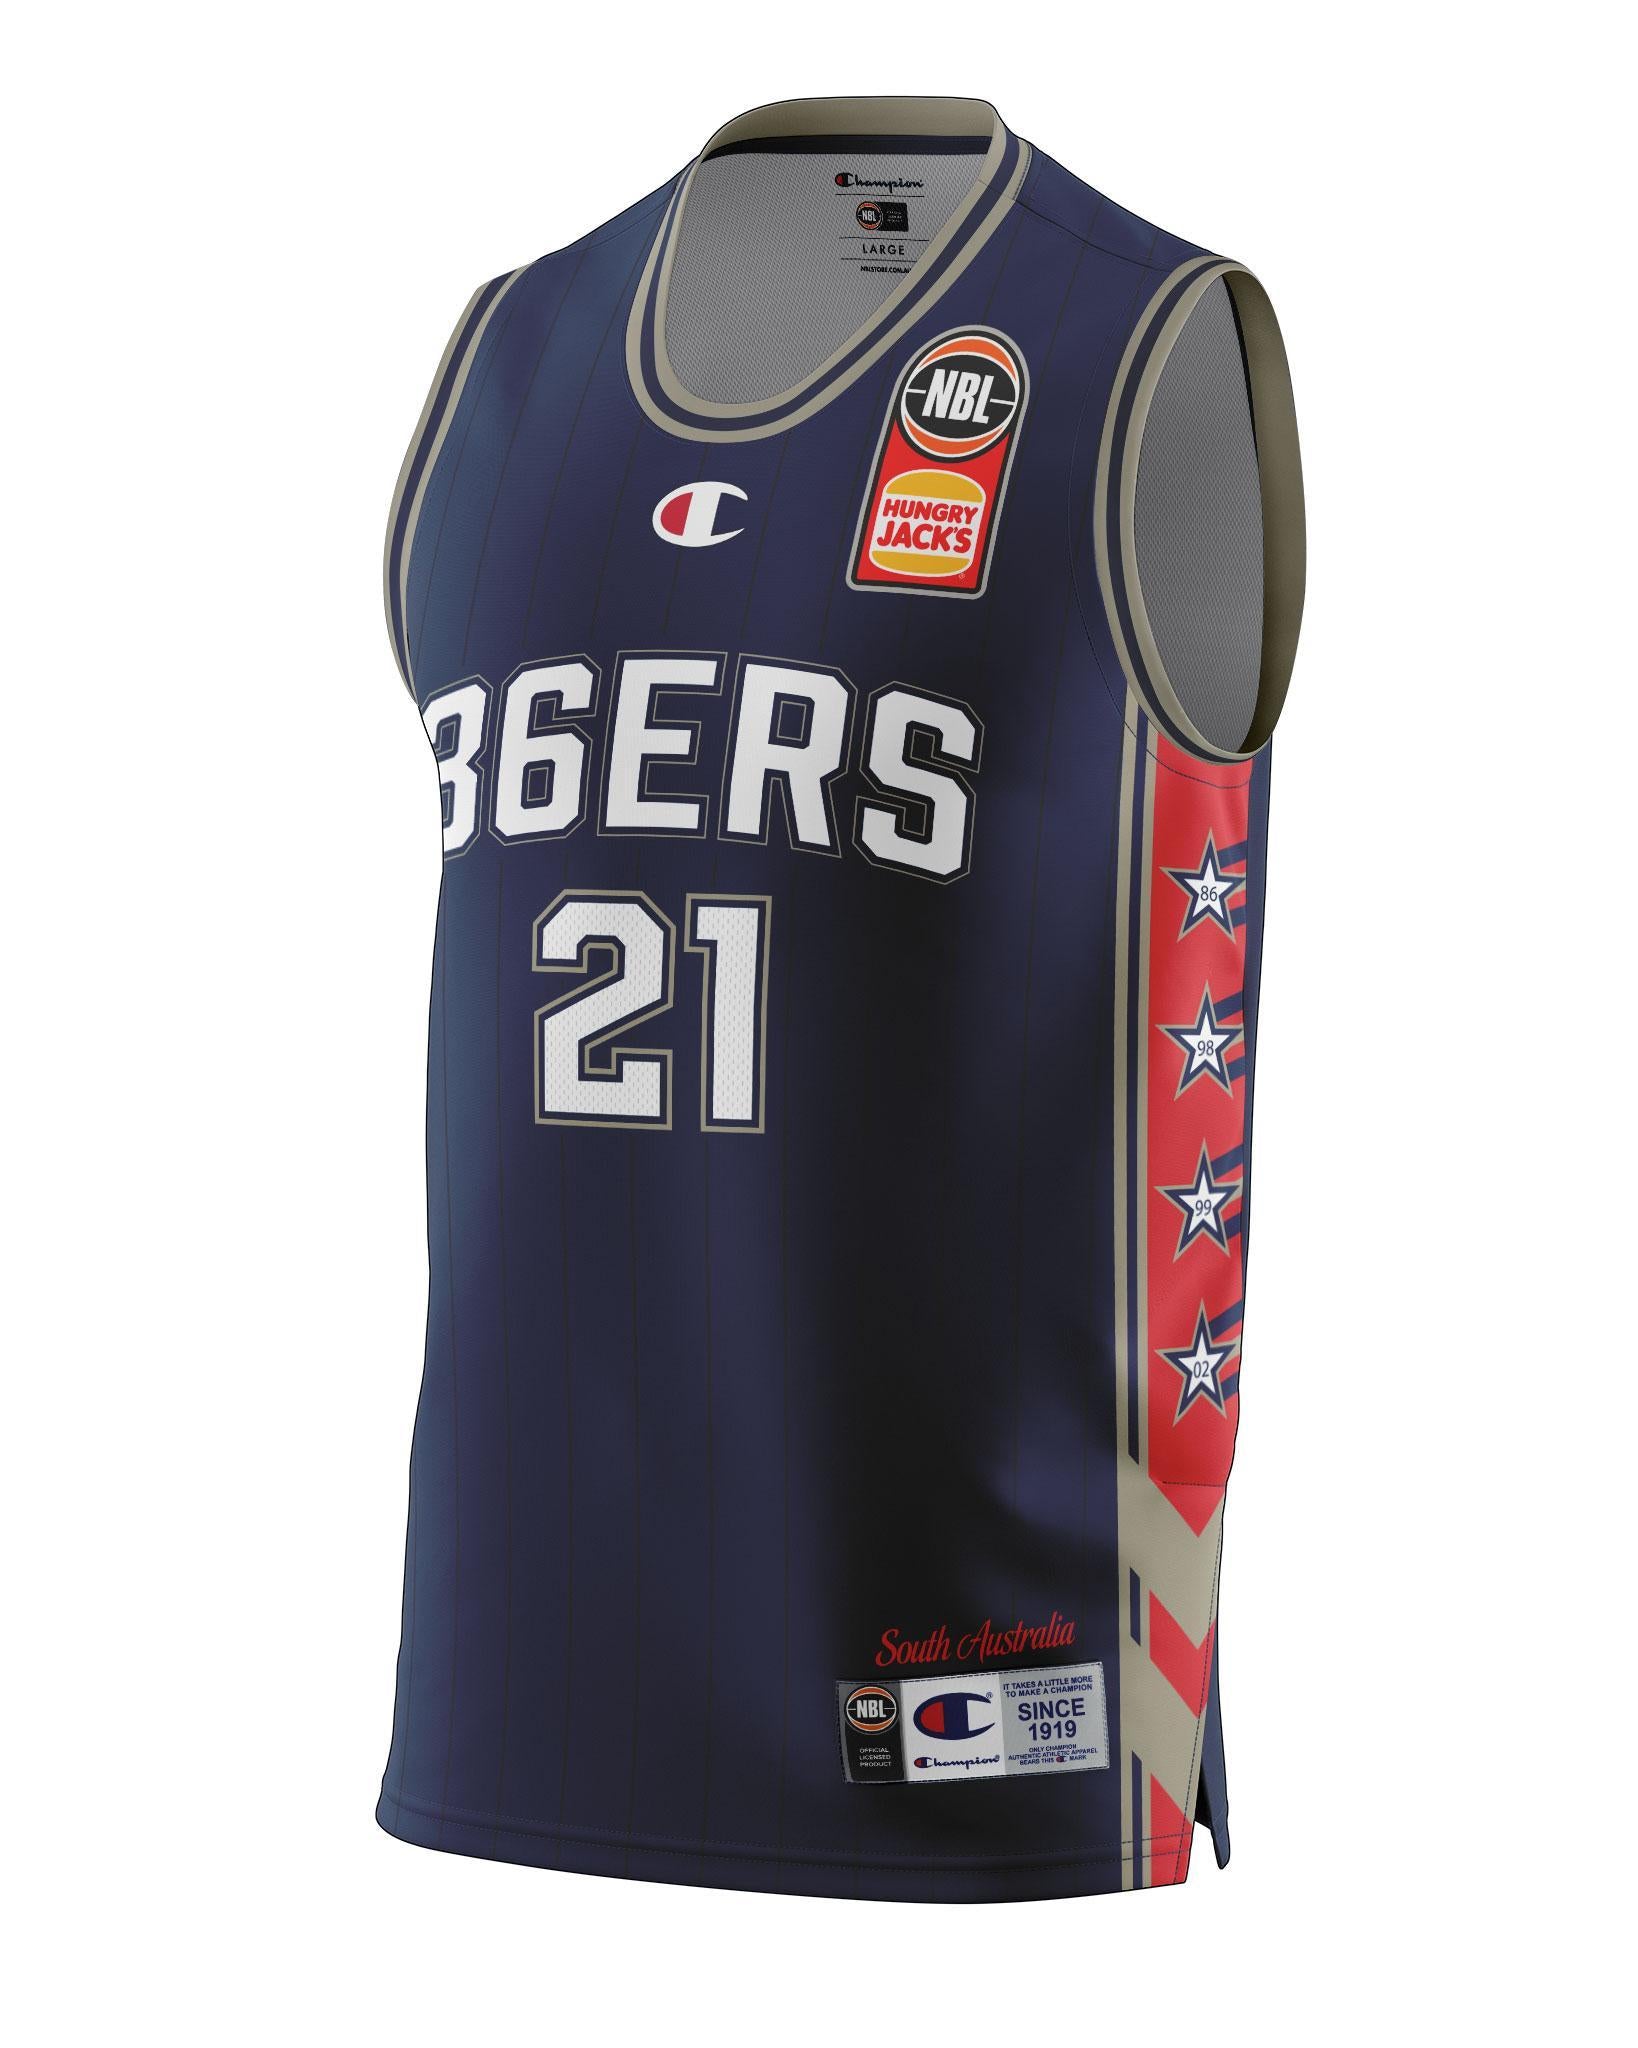 Adelaide 36ers 2021/22 Authentic Home Youth Jersey - Daniel Johnson - Adelaide 36ers